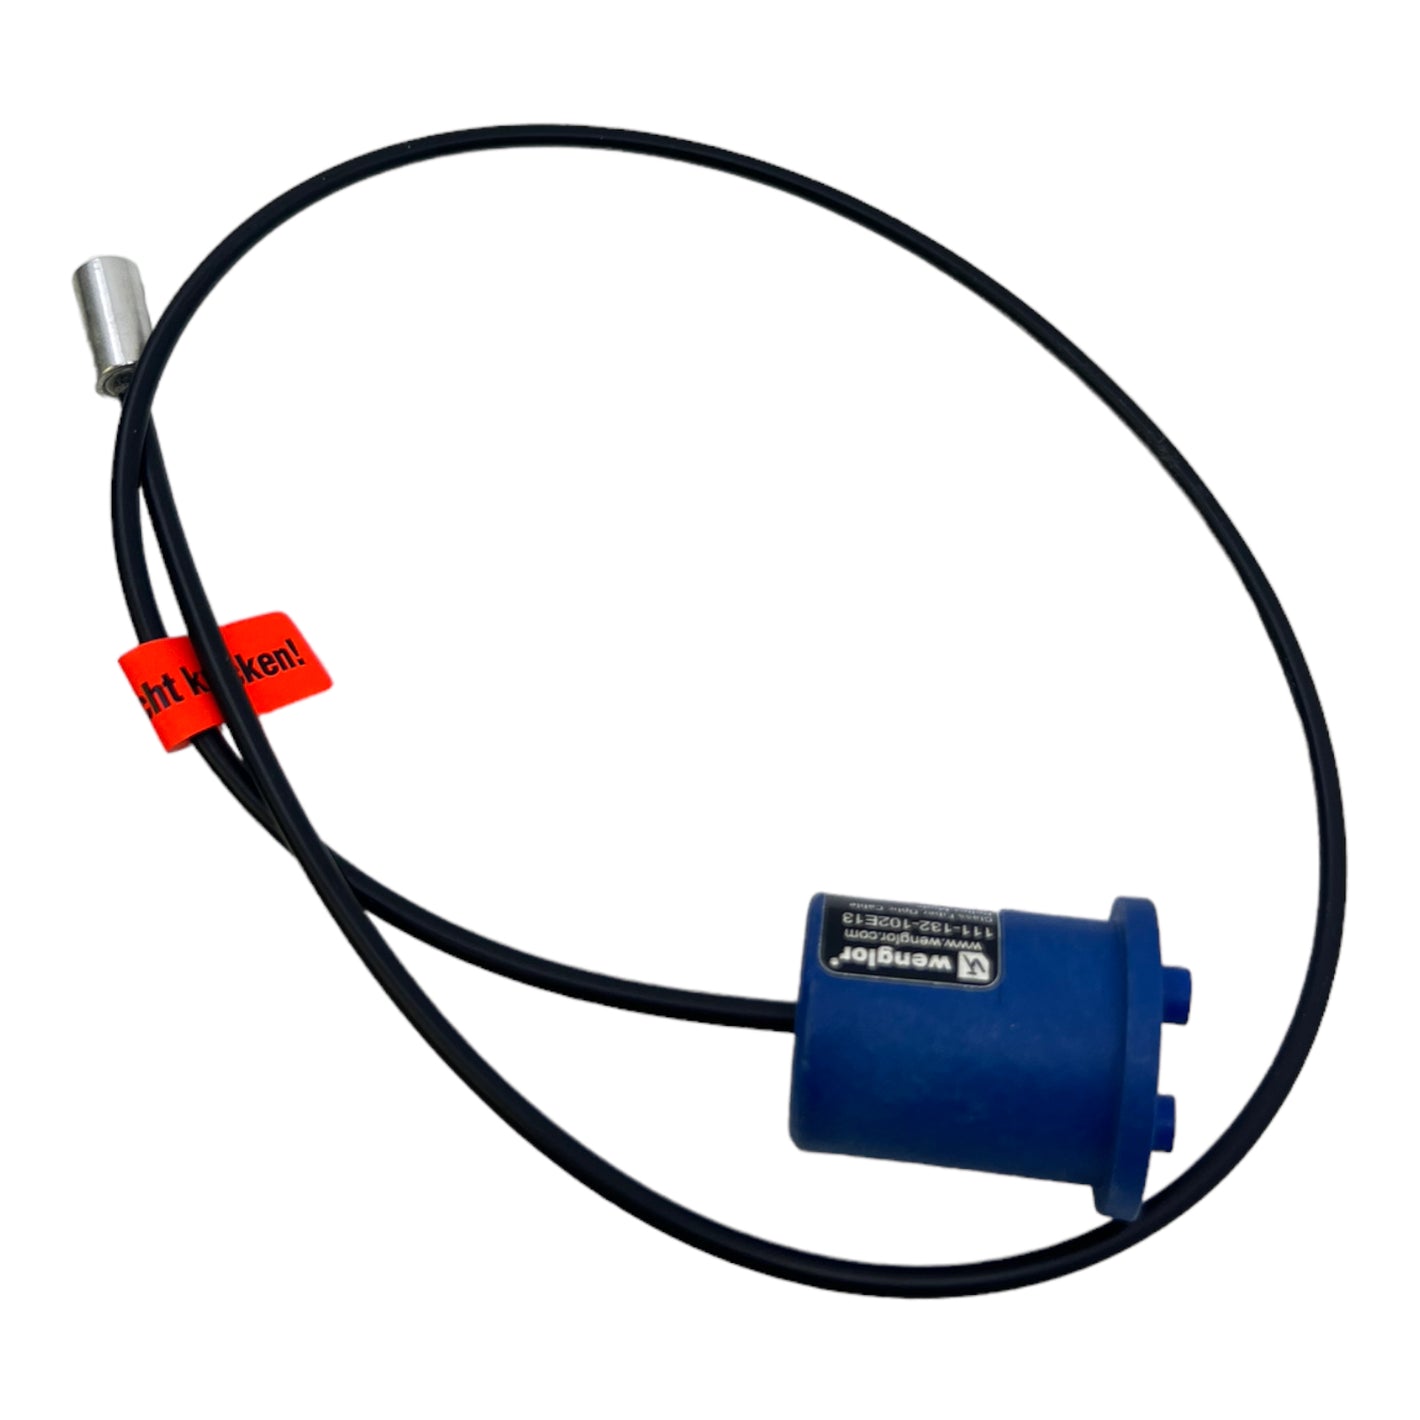 Wenglor 111-132-102E13 sensor with fiber optic cable Wenglor fiber optic cable 